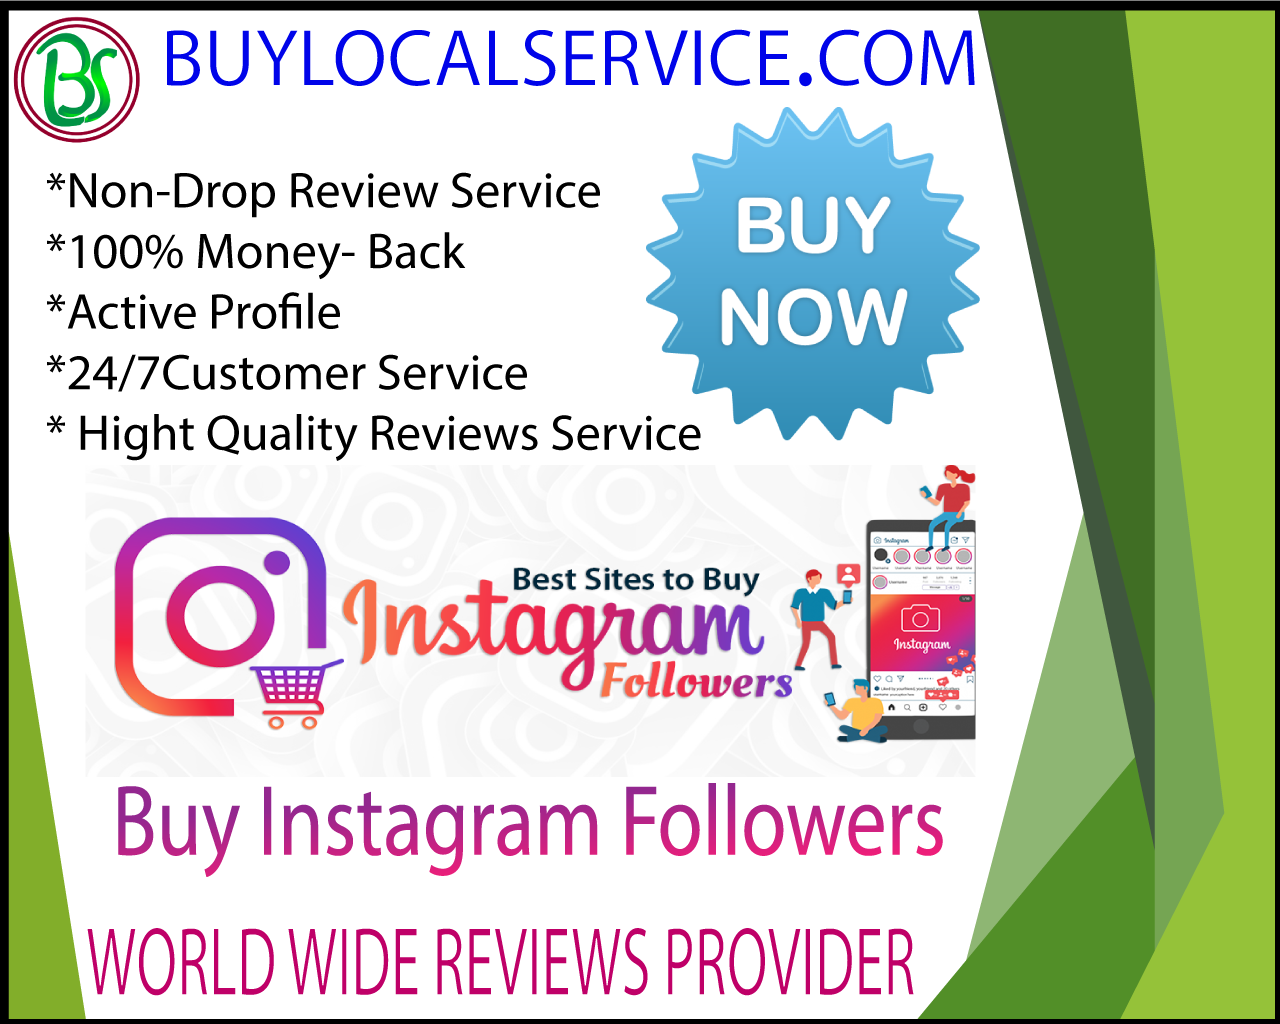 Buy Instagram Followers - 100% Real cheep & Instant delivery